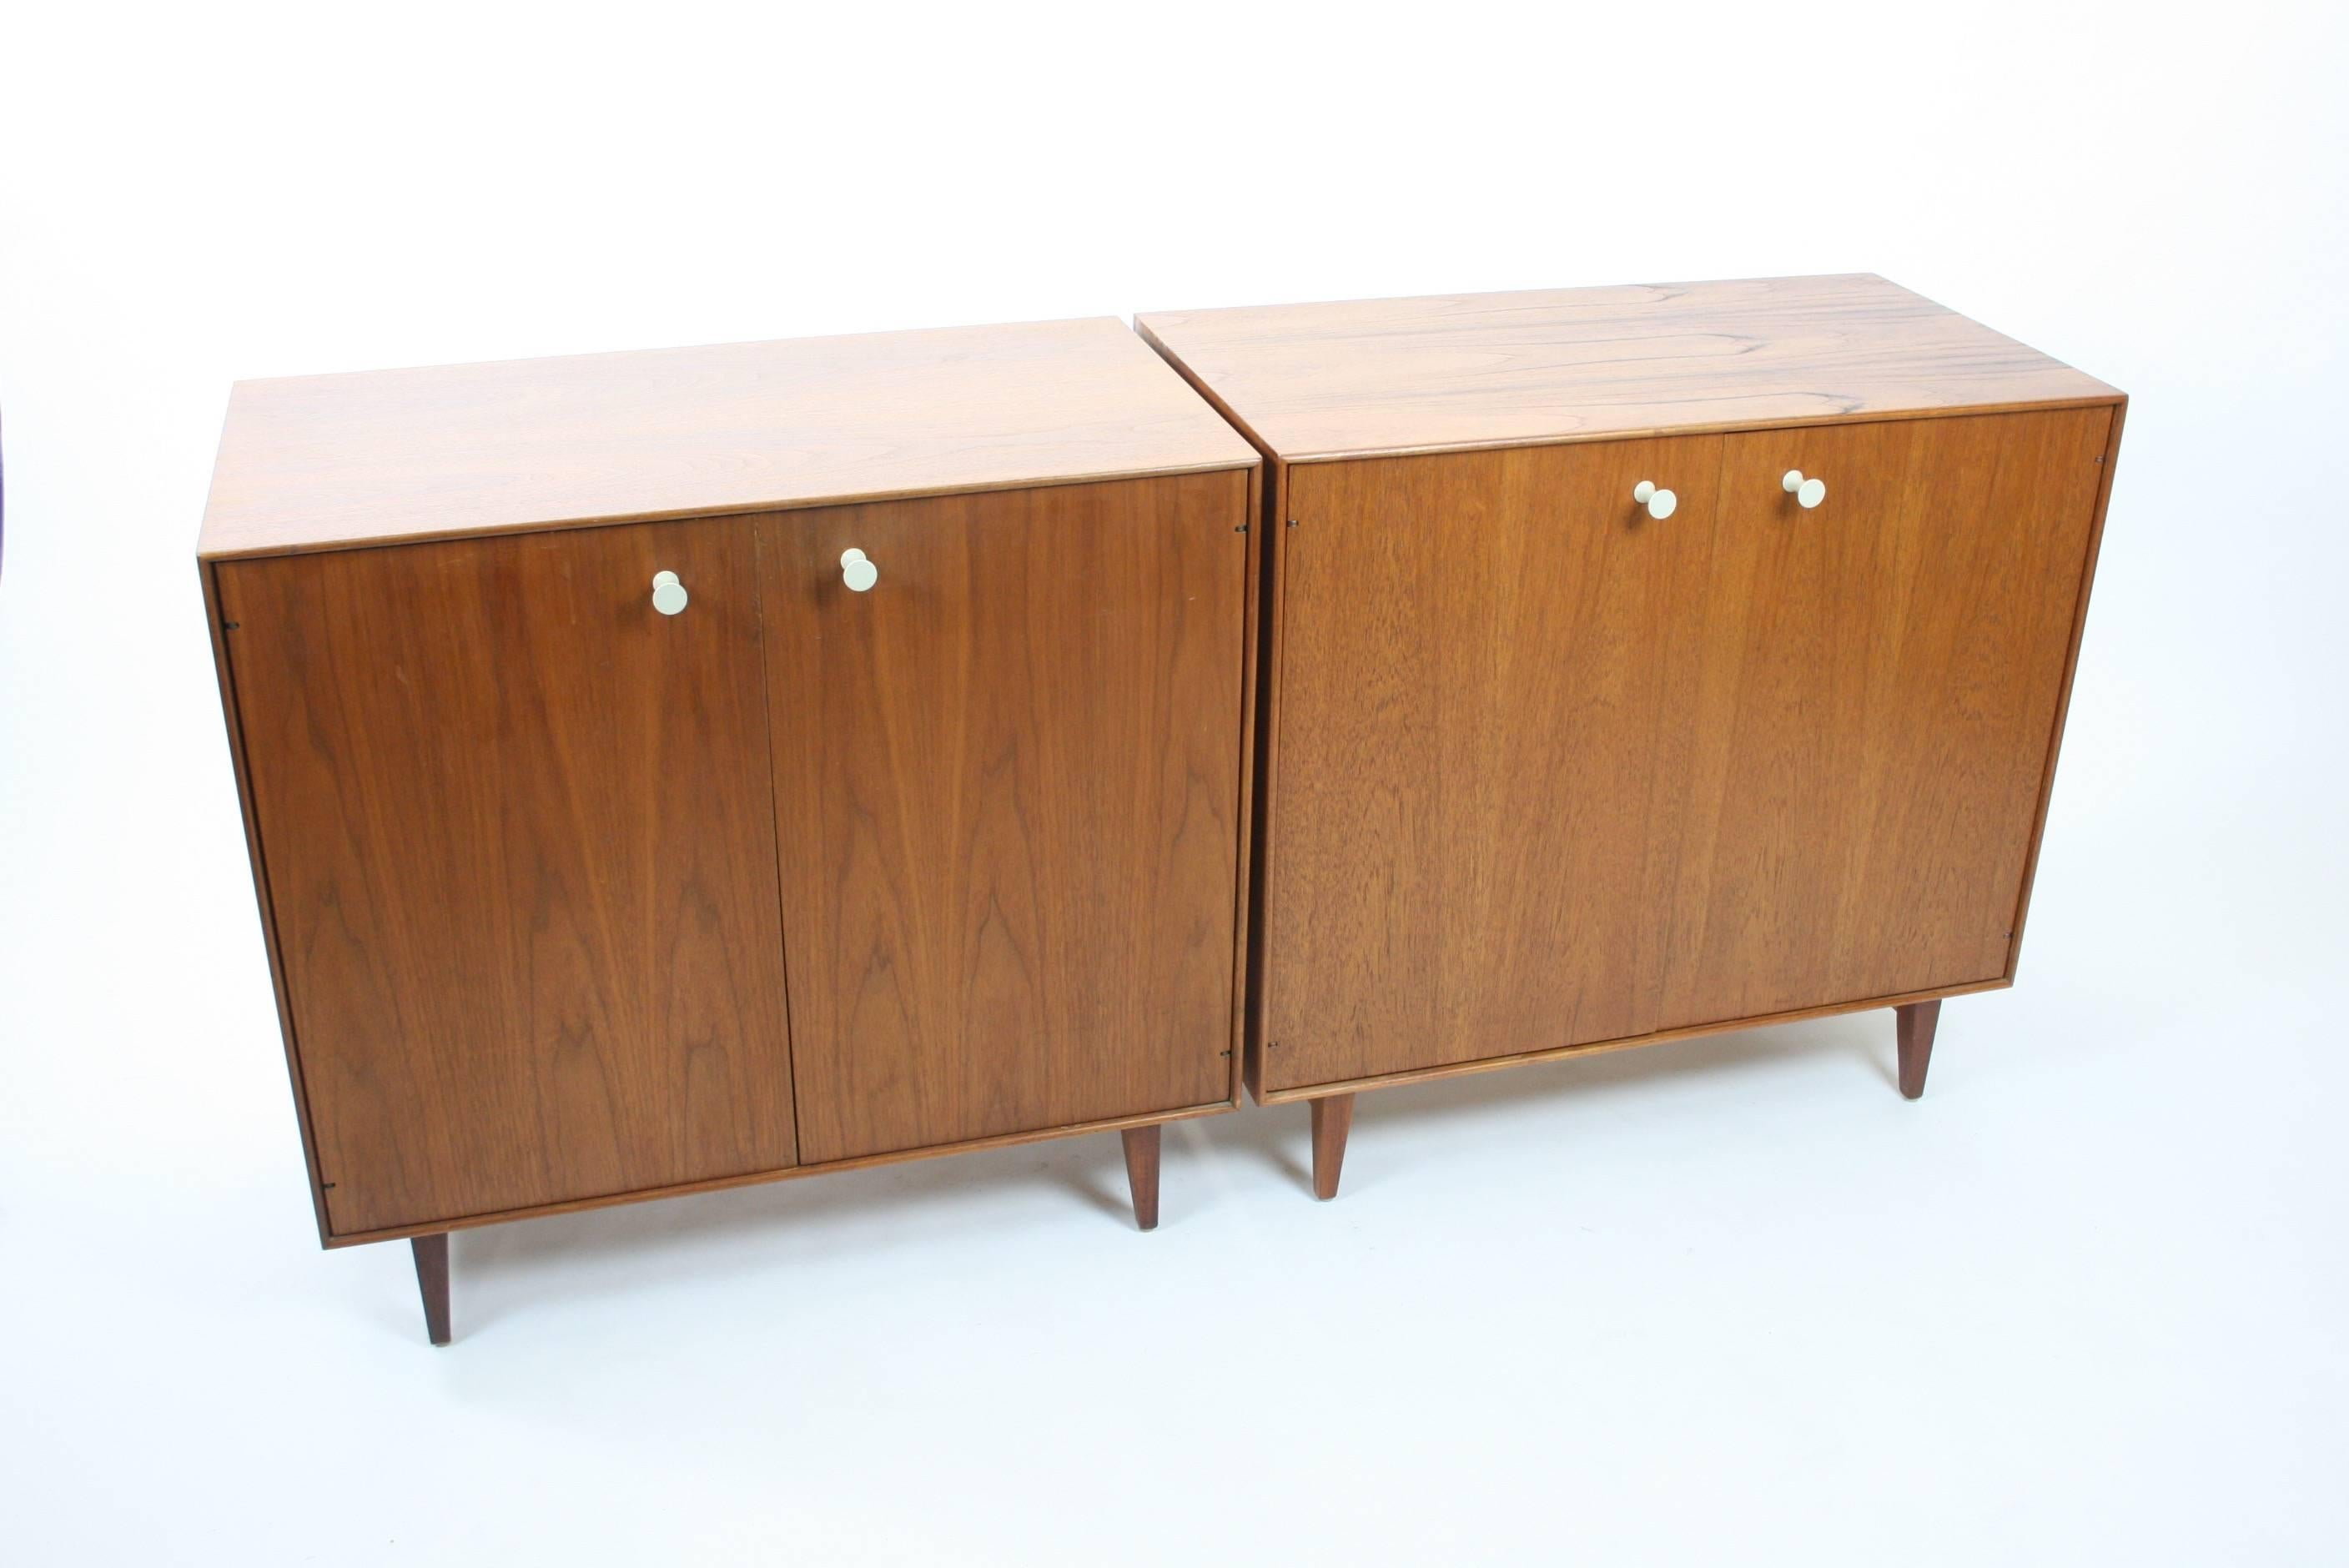 Rare pair. One is walnut (left) and one is teak (right). Both have been completely restored and show off beautifully! Retain original porcelain pulls and uncommon walnut legs. These are harder to find than the aluminum type thin edge legs. Inside of